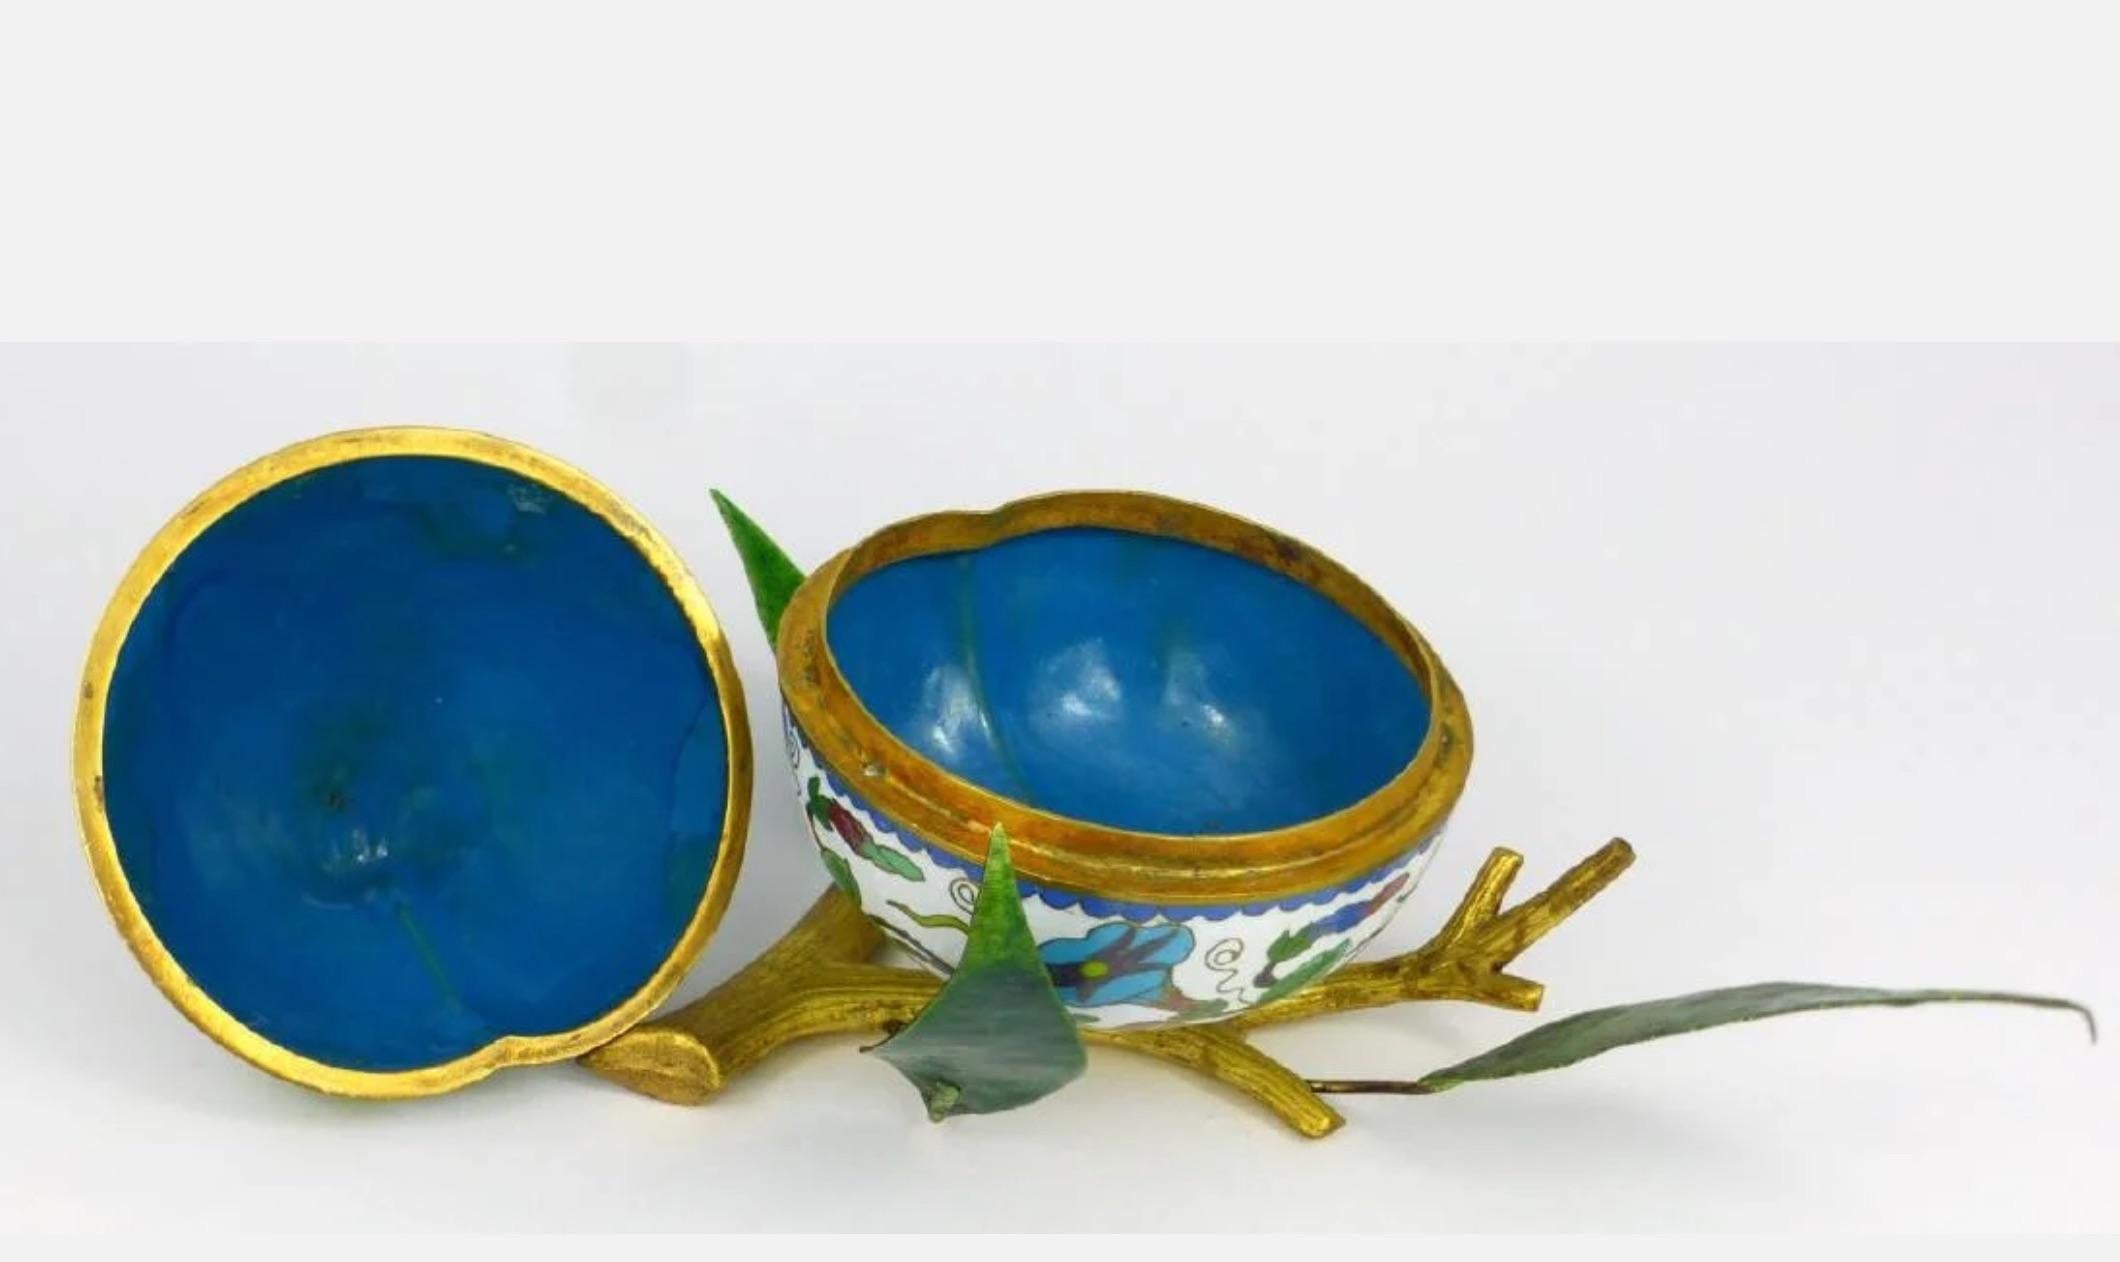 Chinoiserie Pair of Chinese Cloisonné Enamel Peach-Form Box and Cover, circa 1910-1940 For Sale